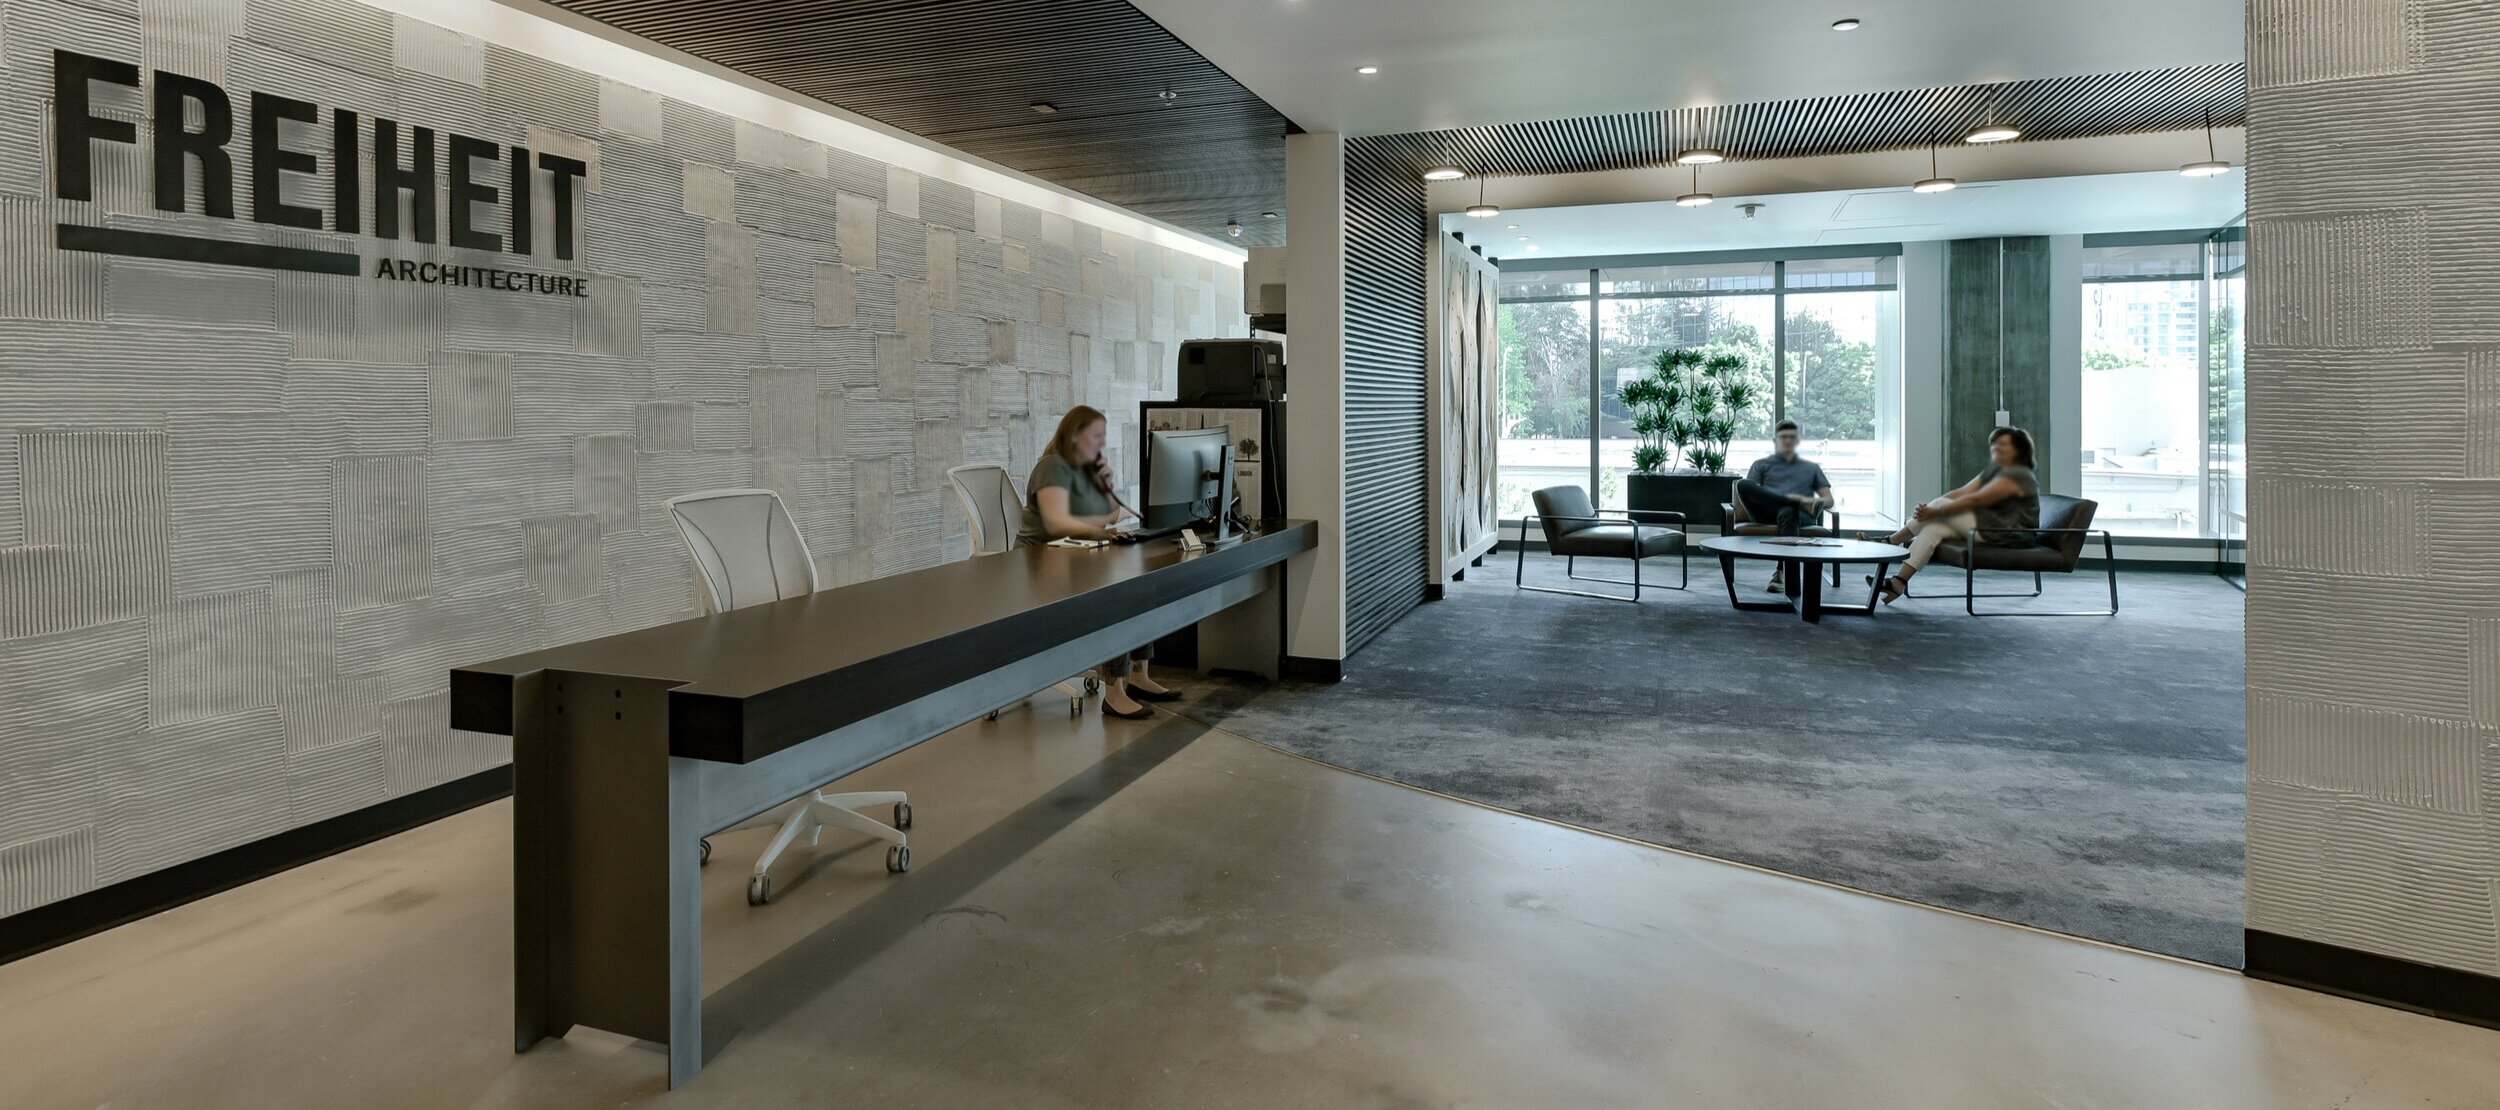 custom reception desk is substantial in size with clean lines